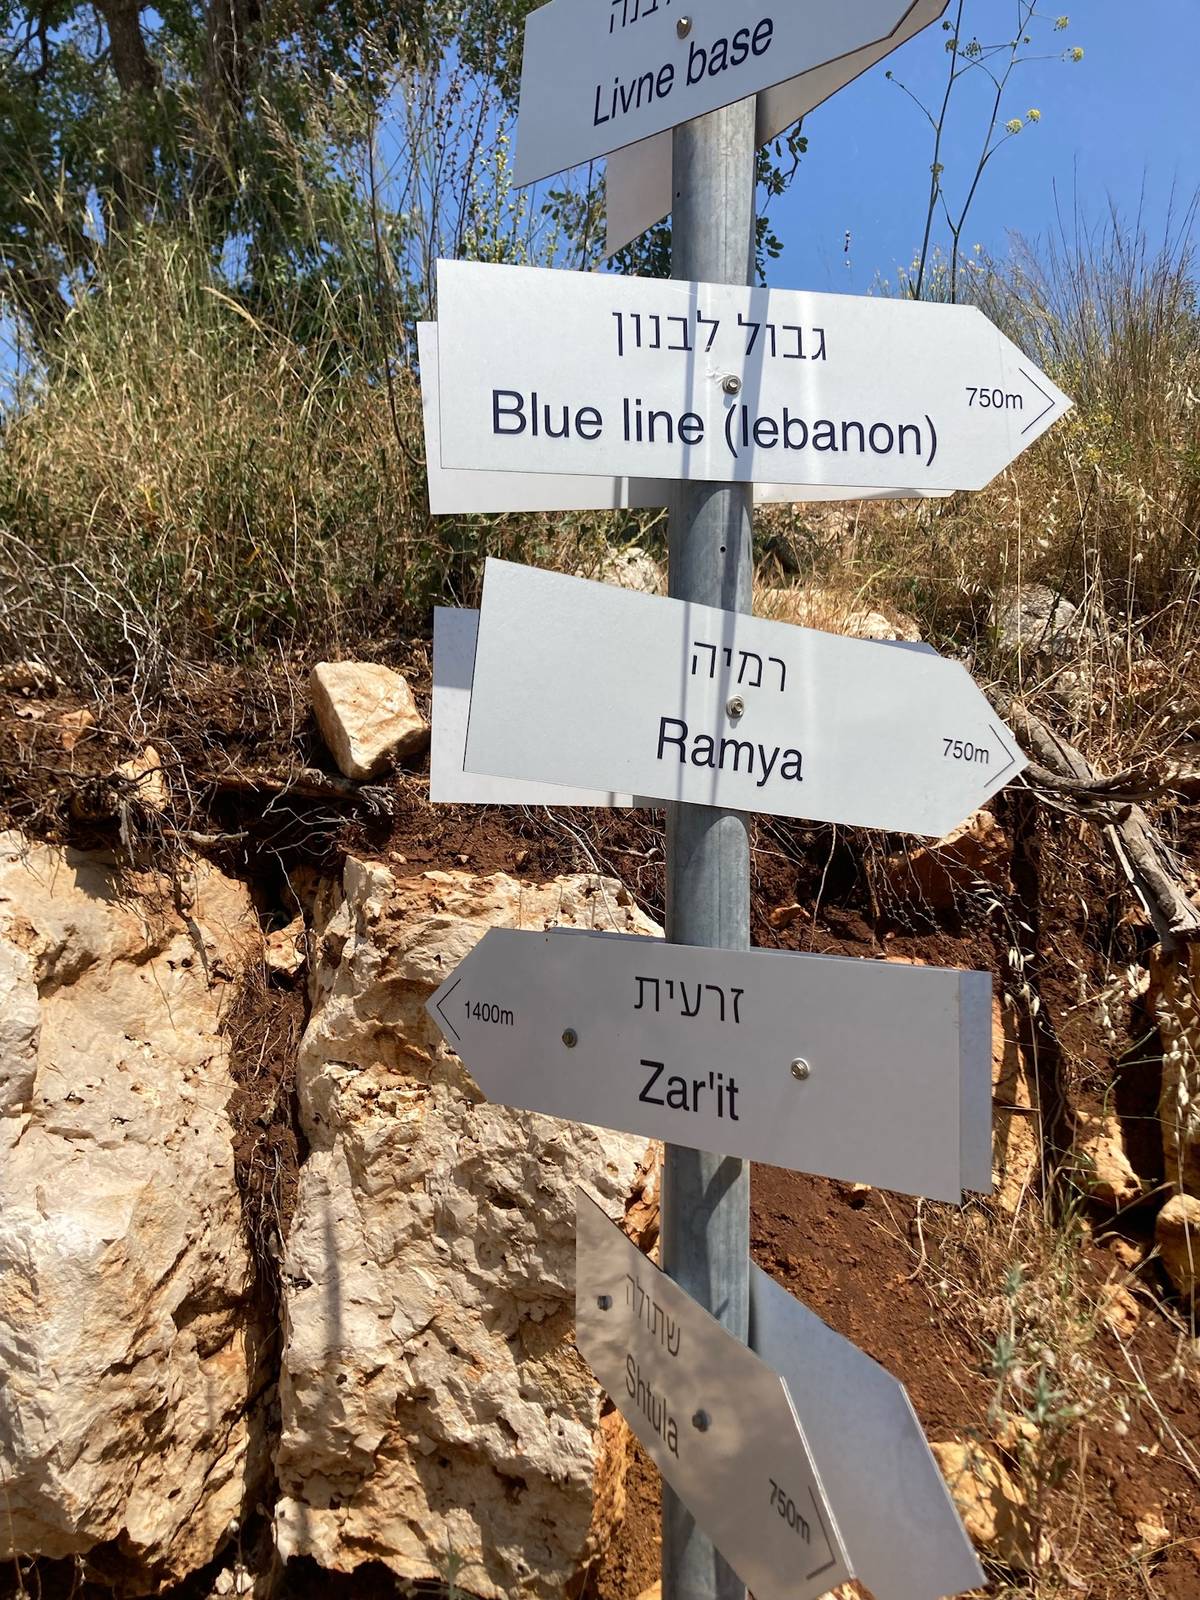 A signpost located just outside the Hezbollah tunnel opening